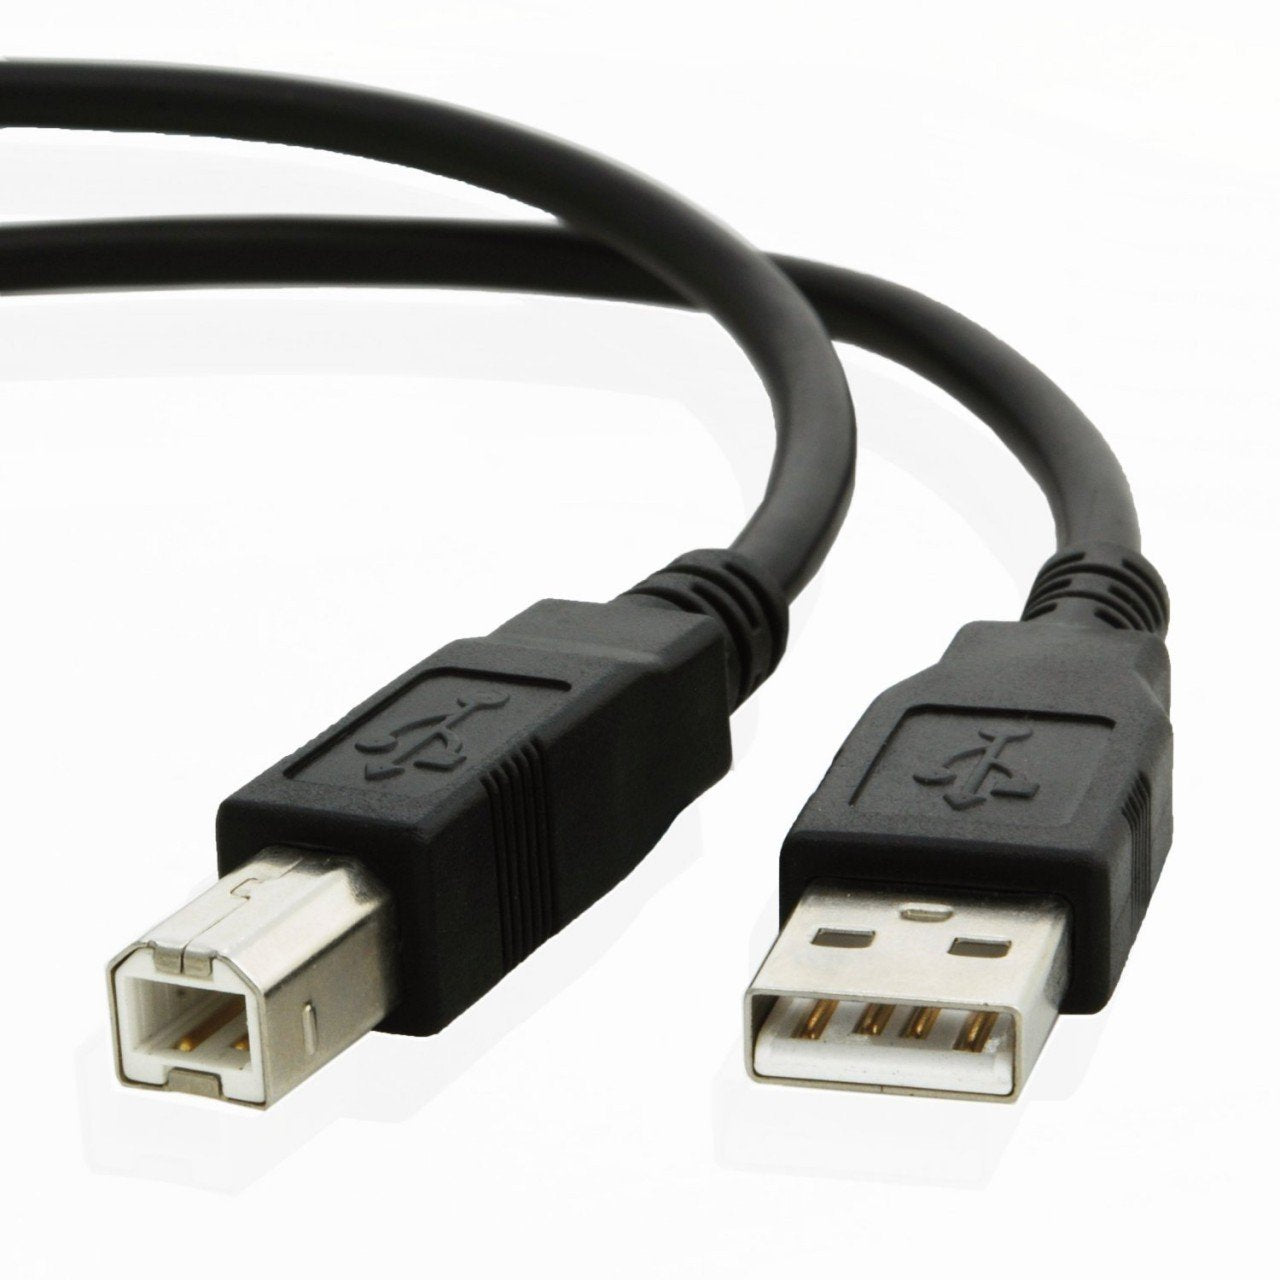 USB cable for Canon PIXMA MG5150